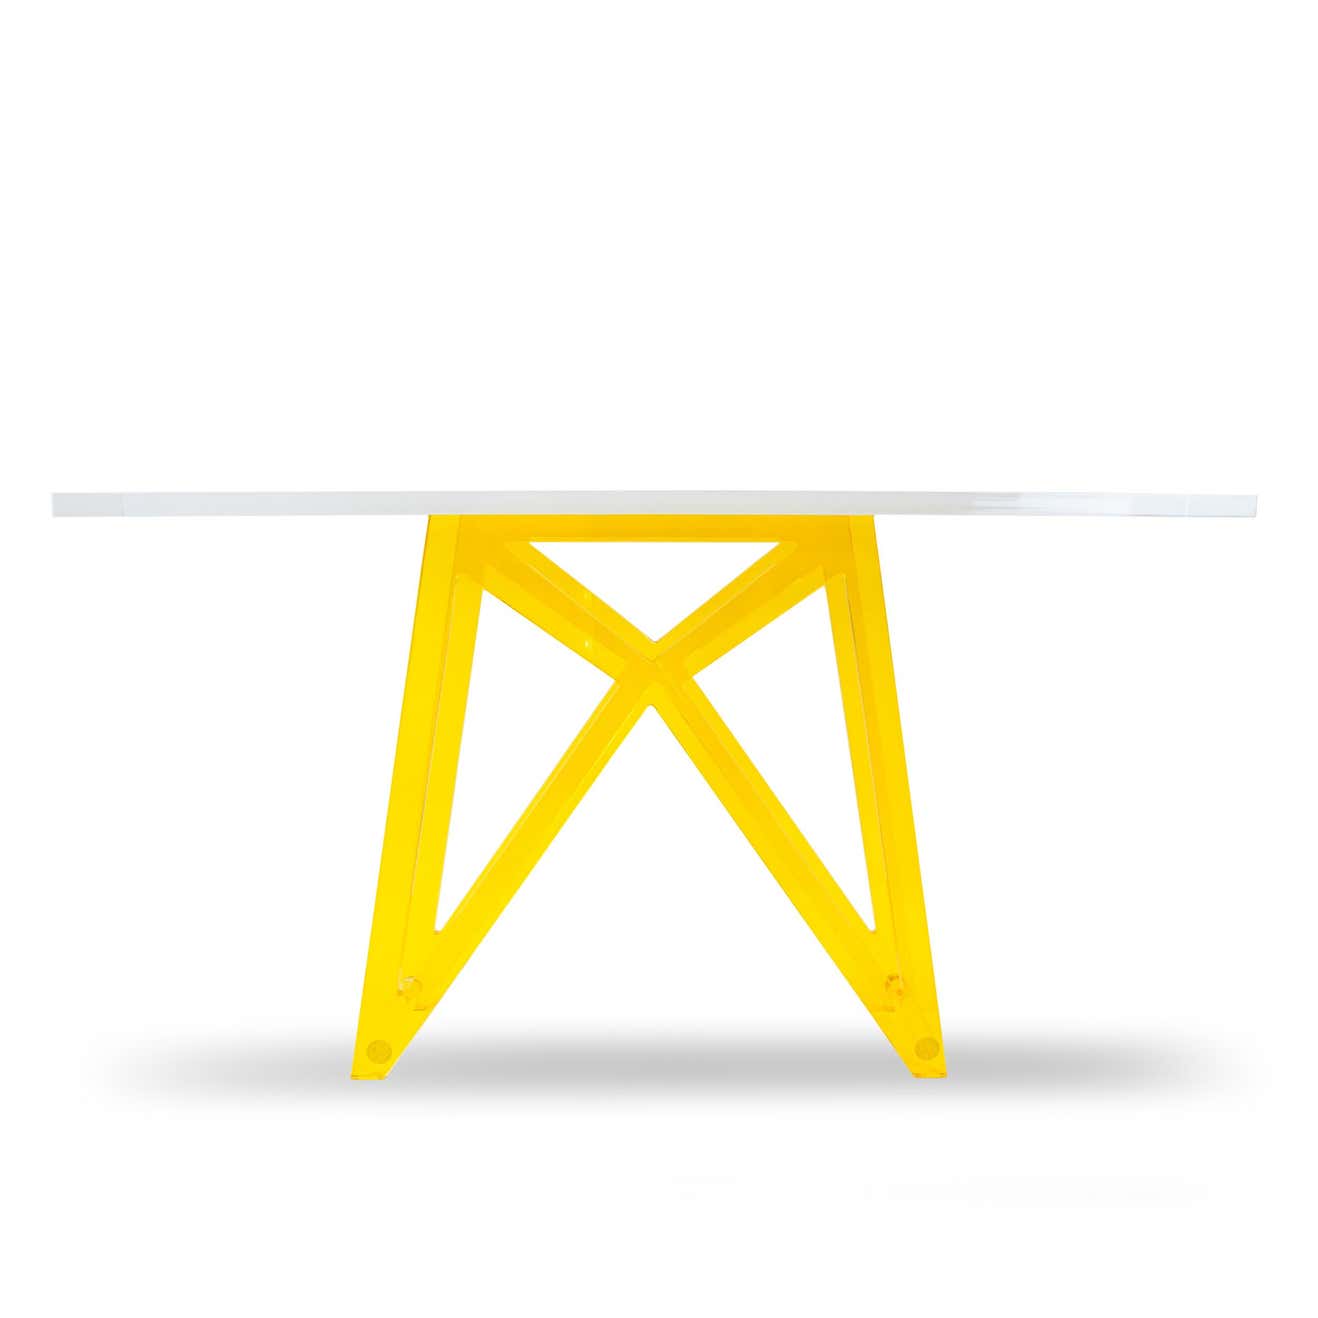 YELLOW LEG COLORED LUCITE CONSOLE TABLE